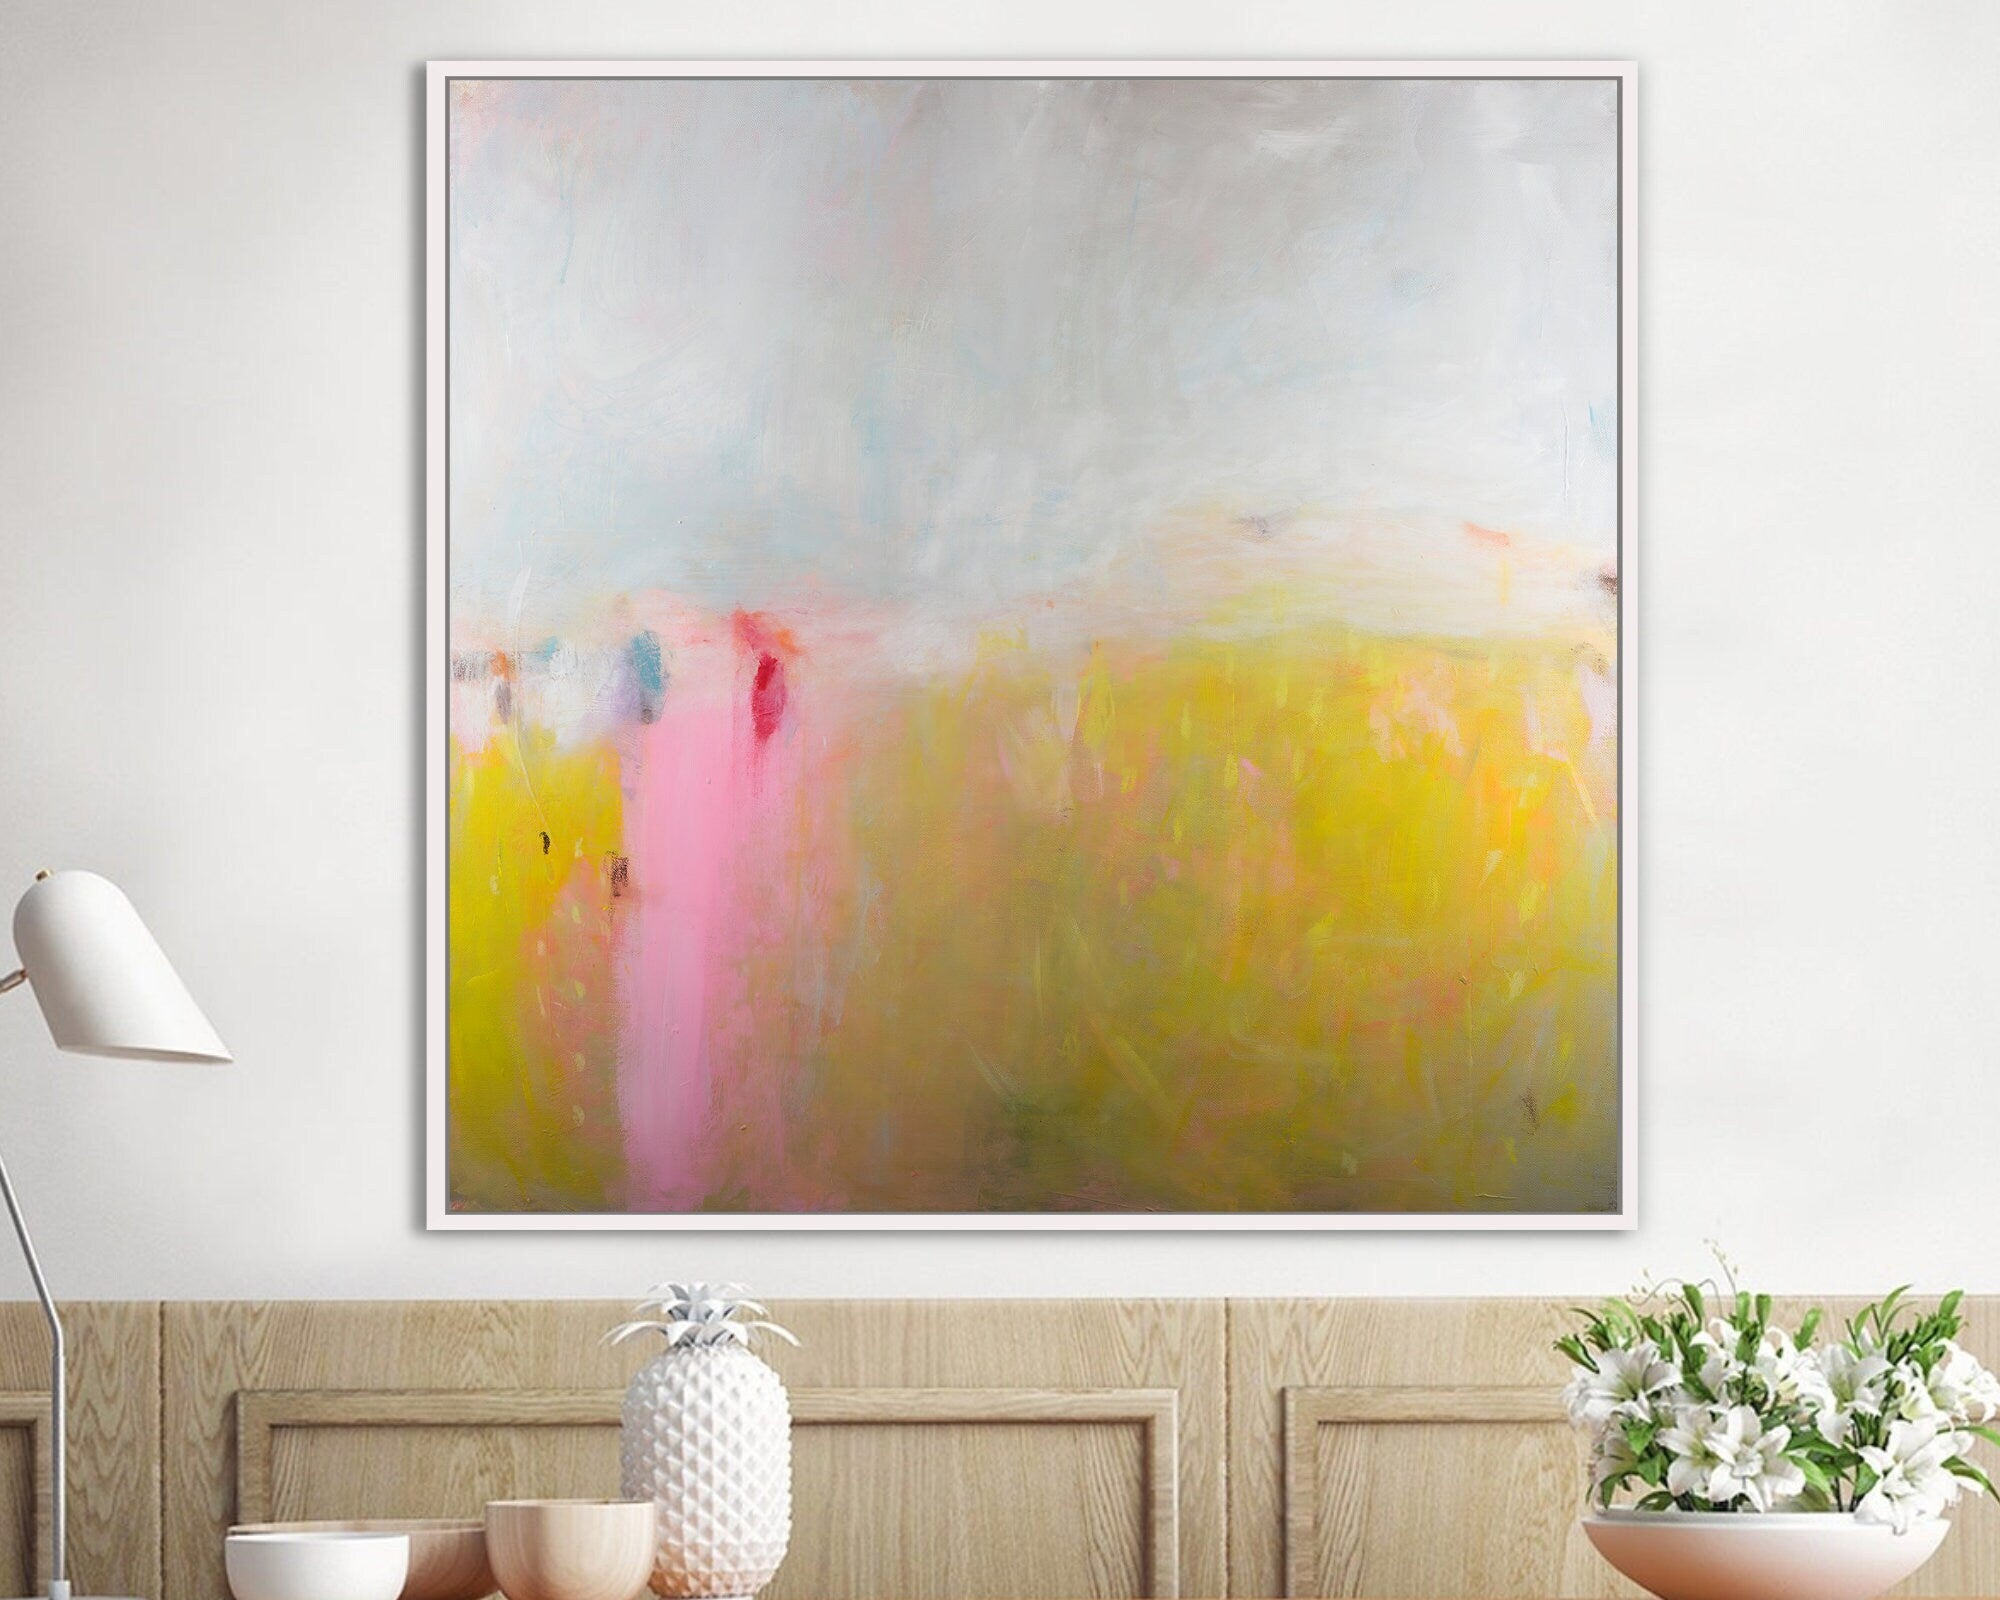 Canvas Art, Large Abstract Painting, Contemporary Art, Large